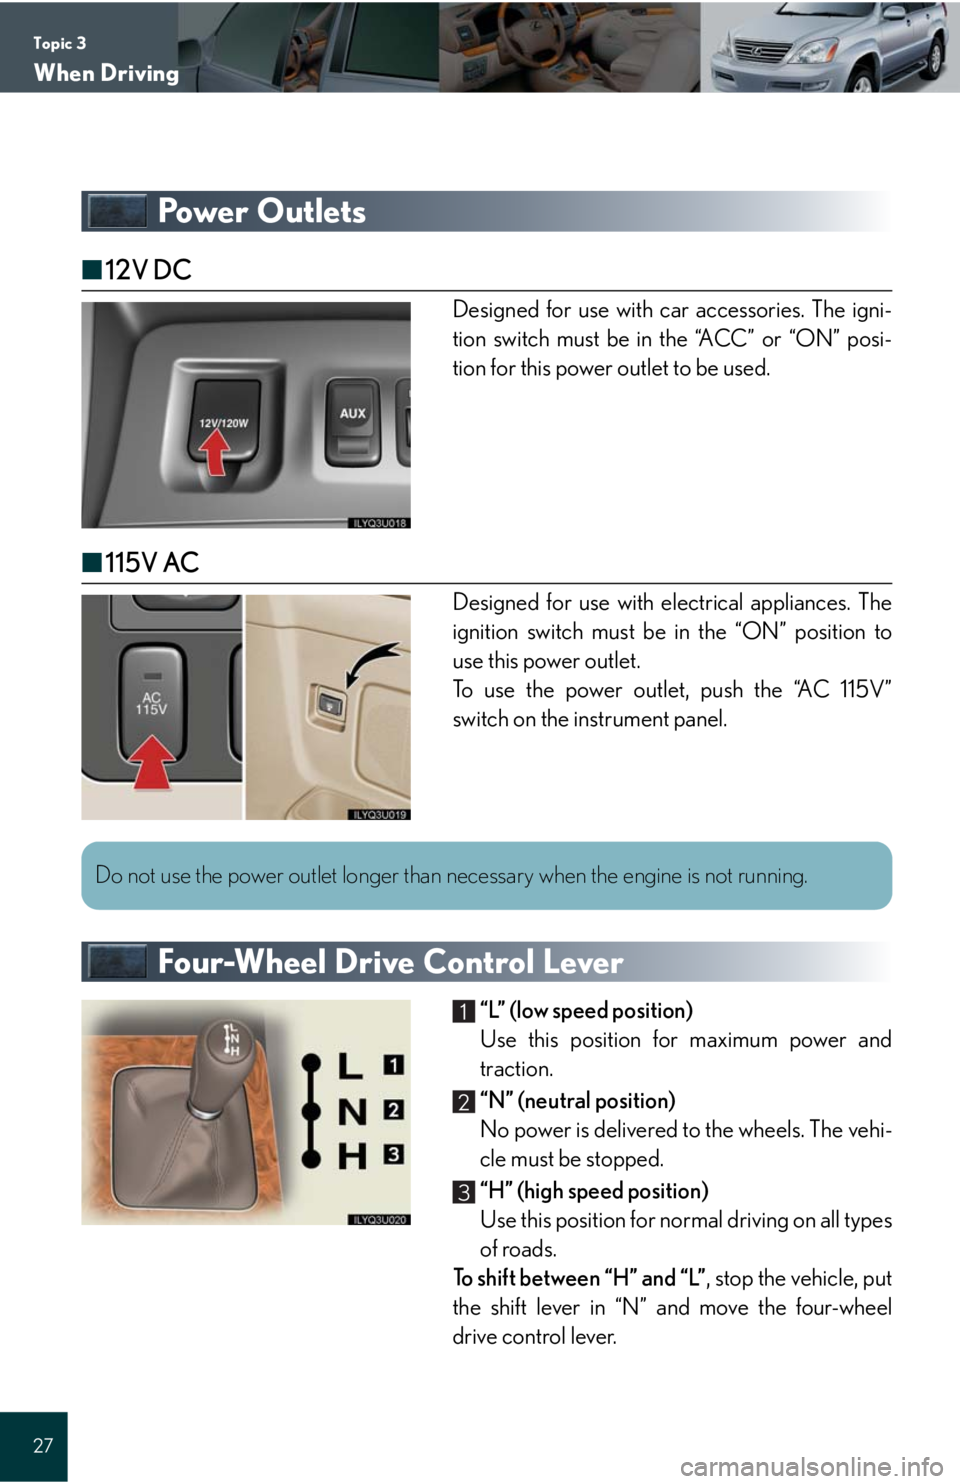 Lexus GX470 2008  Opening, closing and locking the doors / LEXUS 2008 GX470 QUICK GUIDE OWNERS MANUAL (OM60D81U) Topic 3
When Driving
27
Powe r  O u t l e t s
■12V DC
Designed for use with car accessories. The igni-
tion switch must be in the “ACC” or “ON” posi-
tion for this power outlet to be used.
�